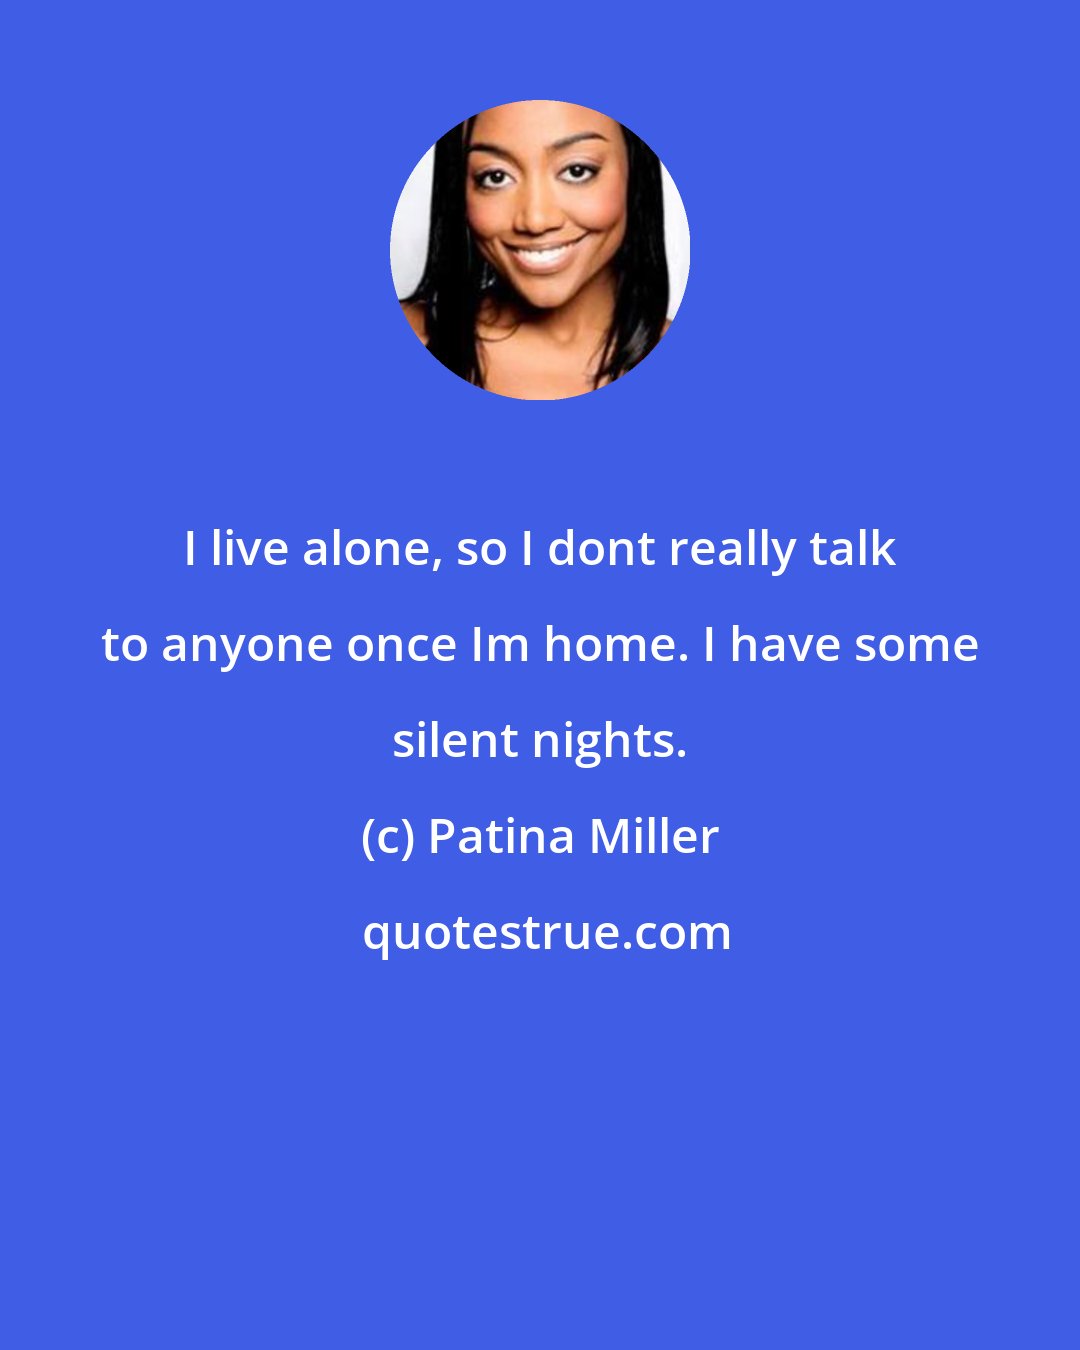 Patina Miller: I live alone, so I dont really talk to anyone once Im home. I have some silent nights.